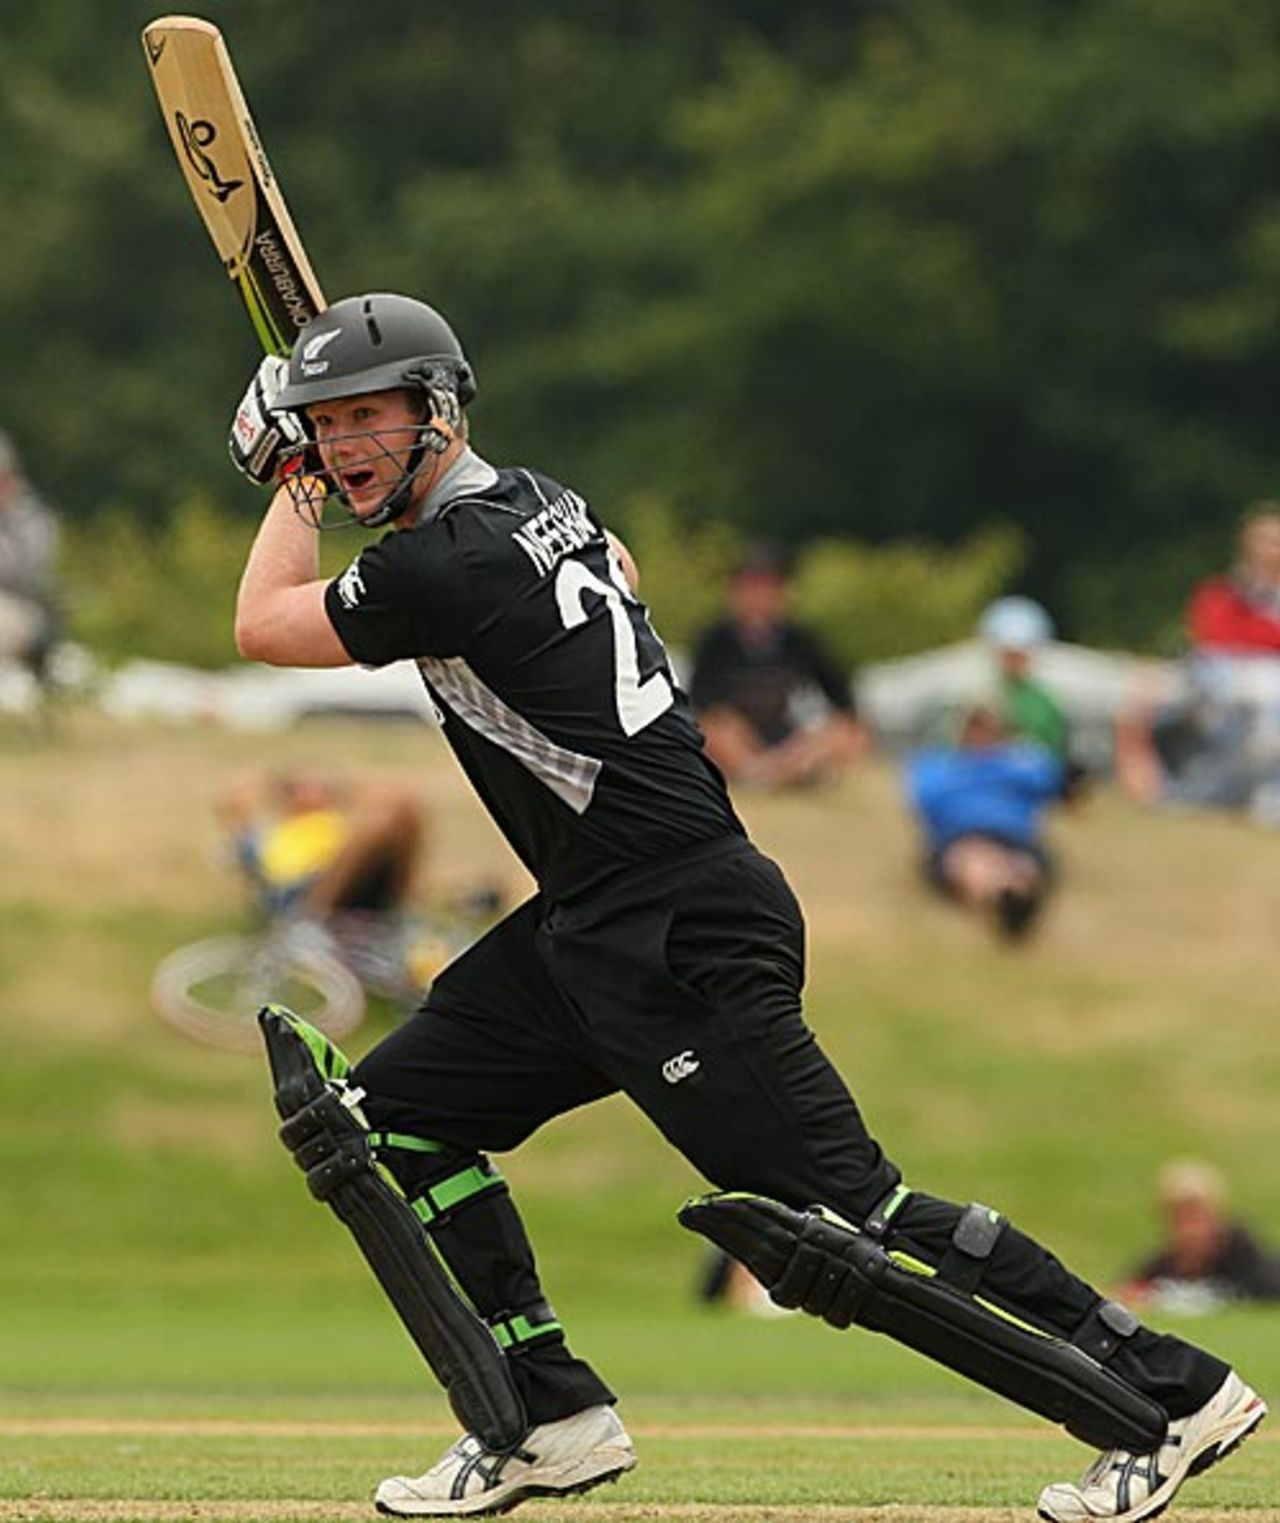 Jimmy Neesham chipped in with a quickfire 47, New Zealand Under-19s v Sri Lanka Under-19s, 23rd Match, Group C, ICC Under-19 World Cup, Christchurch, January 20, 2010